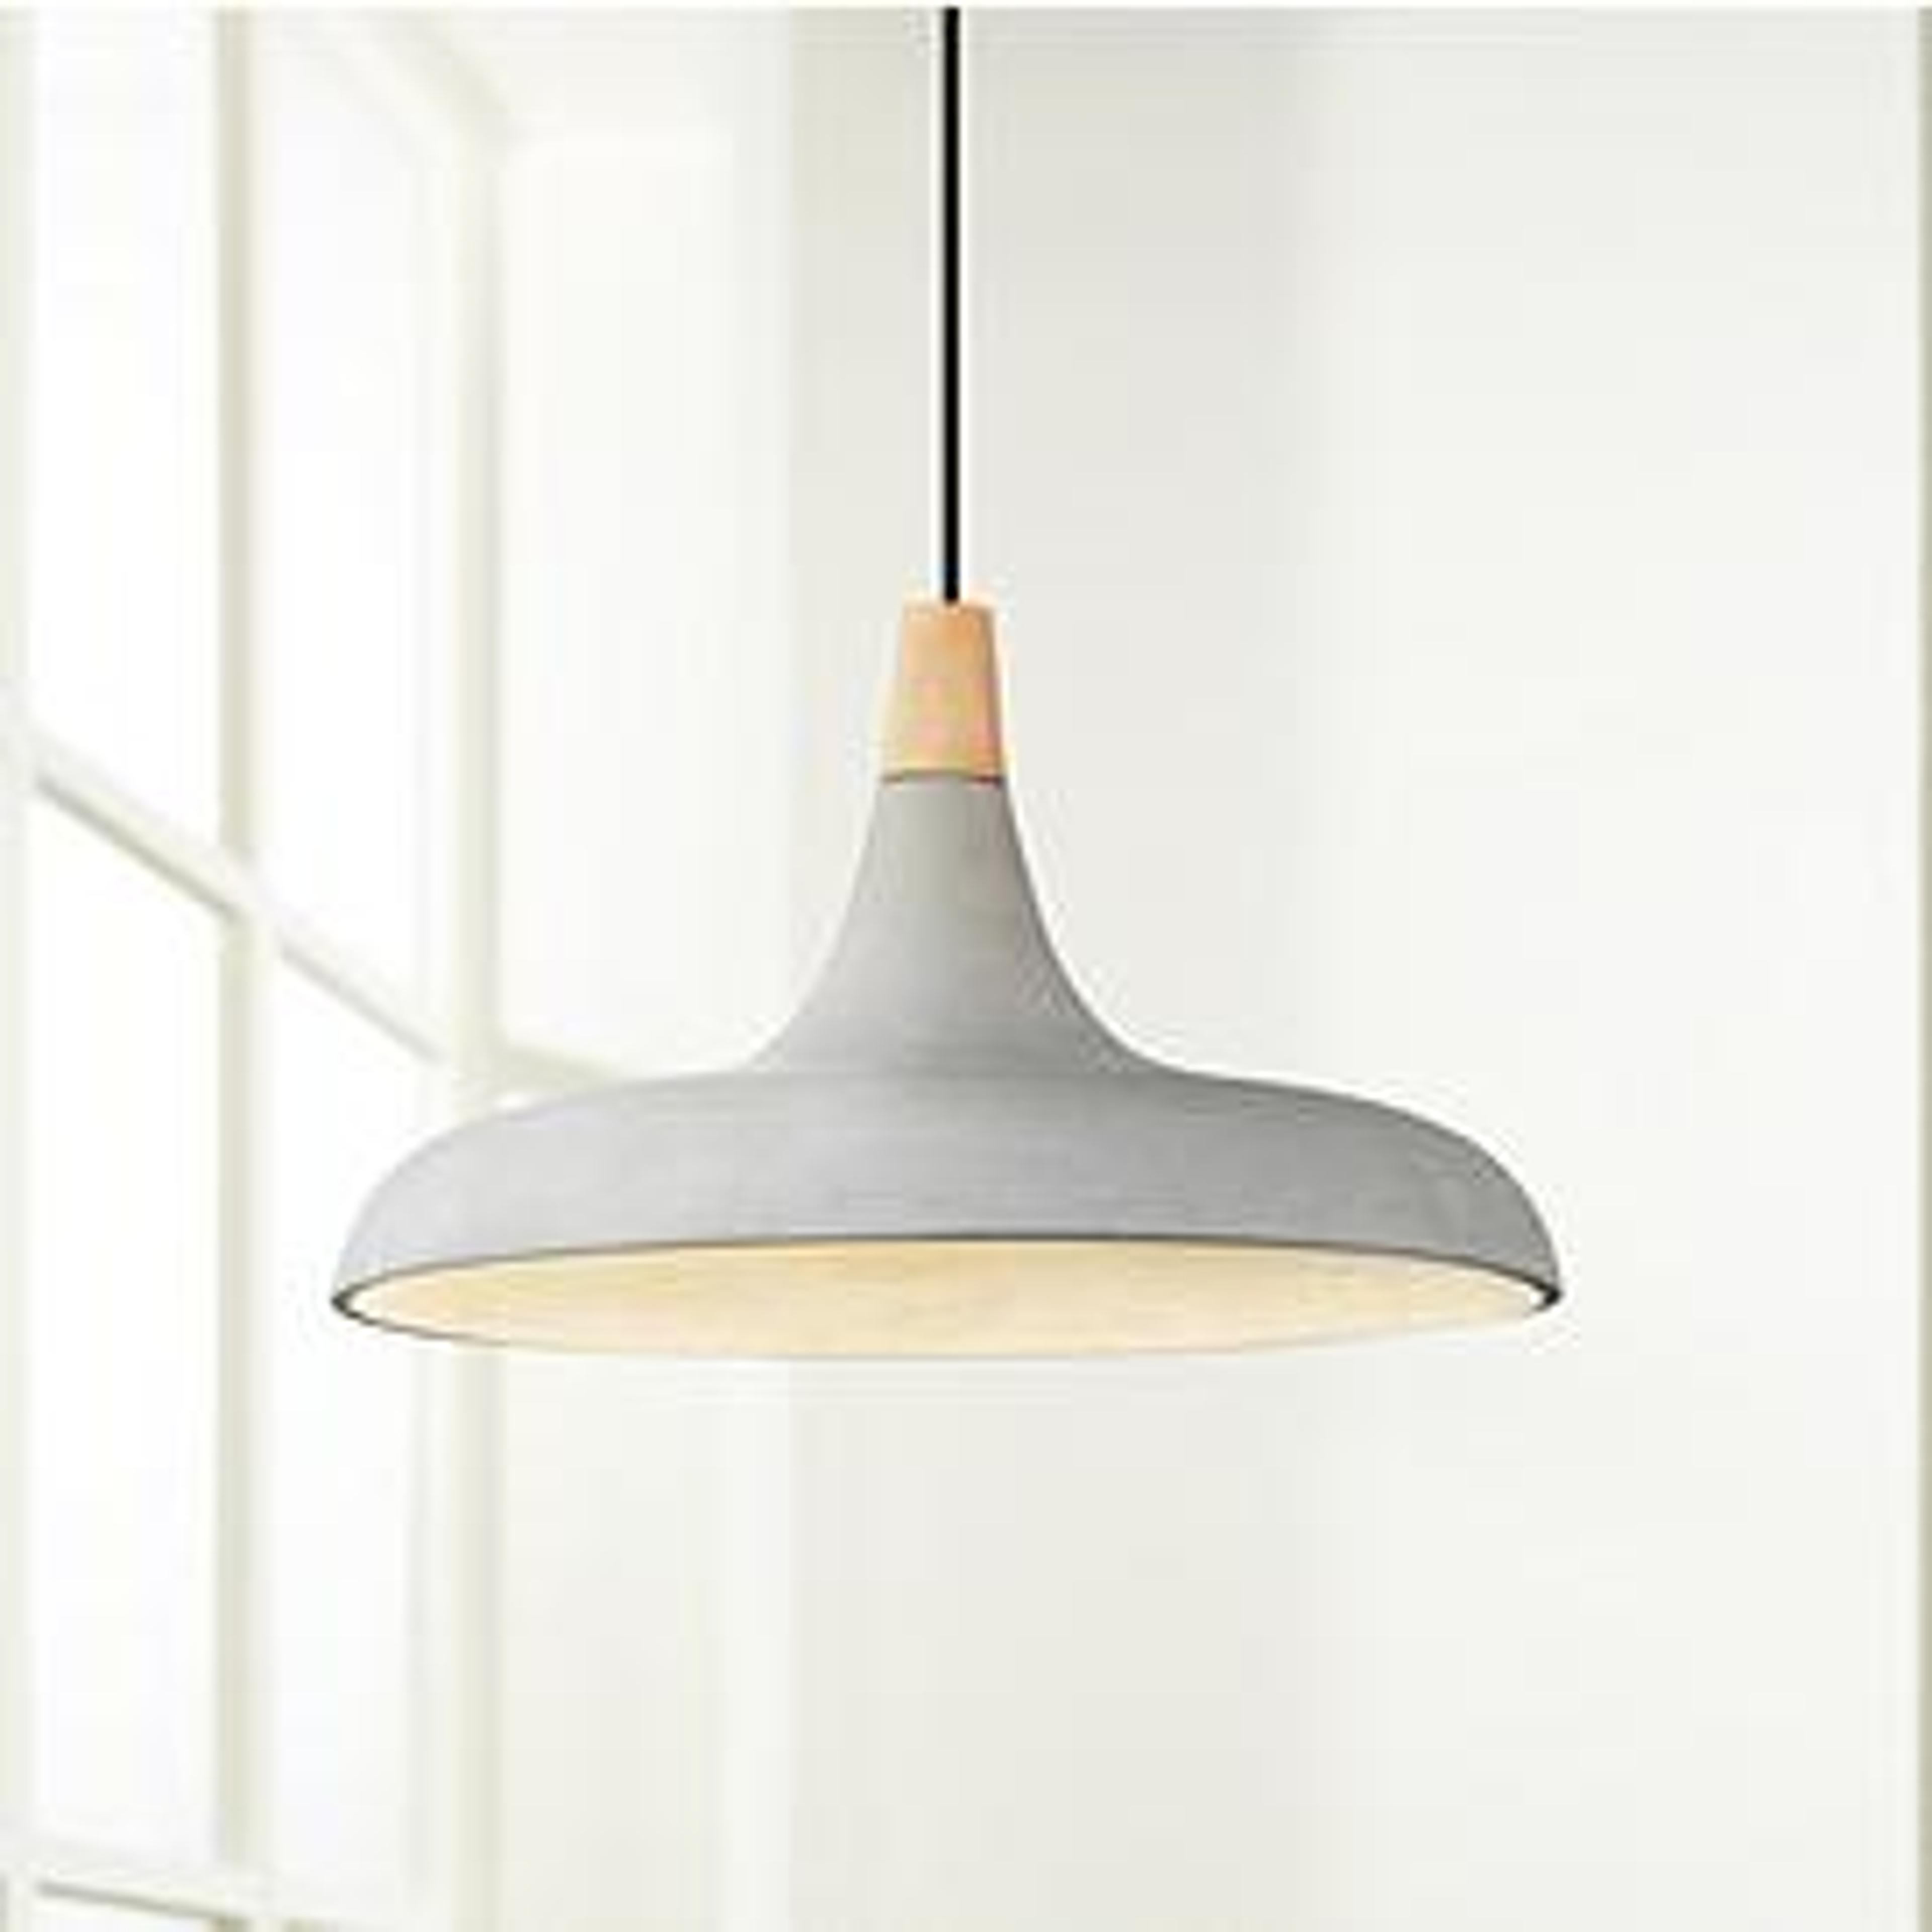 Viola-May 16"W Natural Gray and Textured Black Pendant Light - #79X59 | Lamps Plus